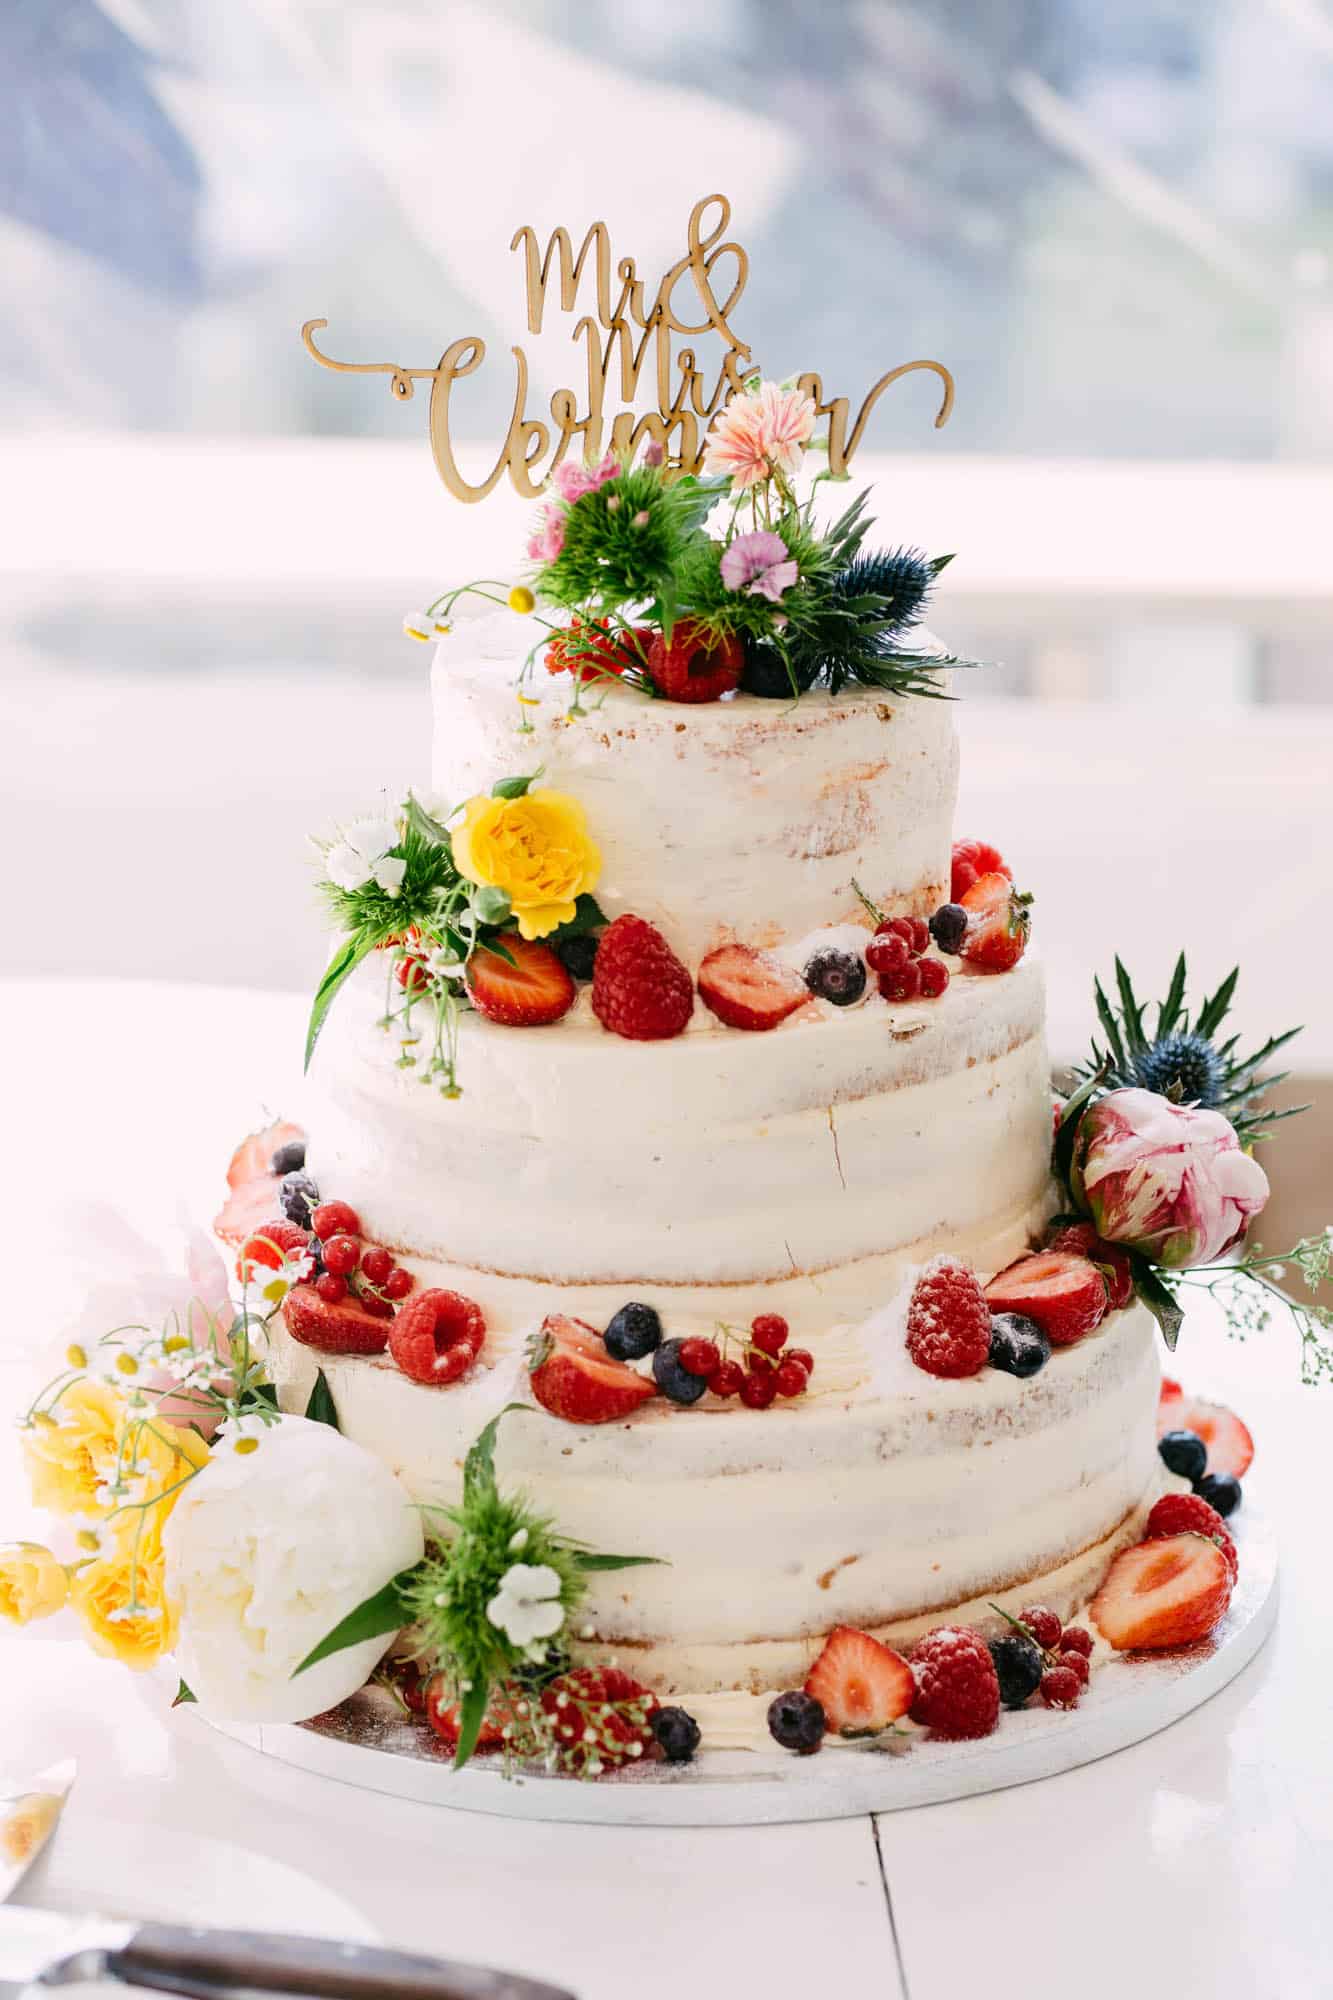 Naked wedding cake 3-layer with flowers and fruit.